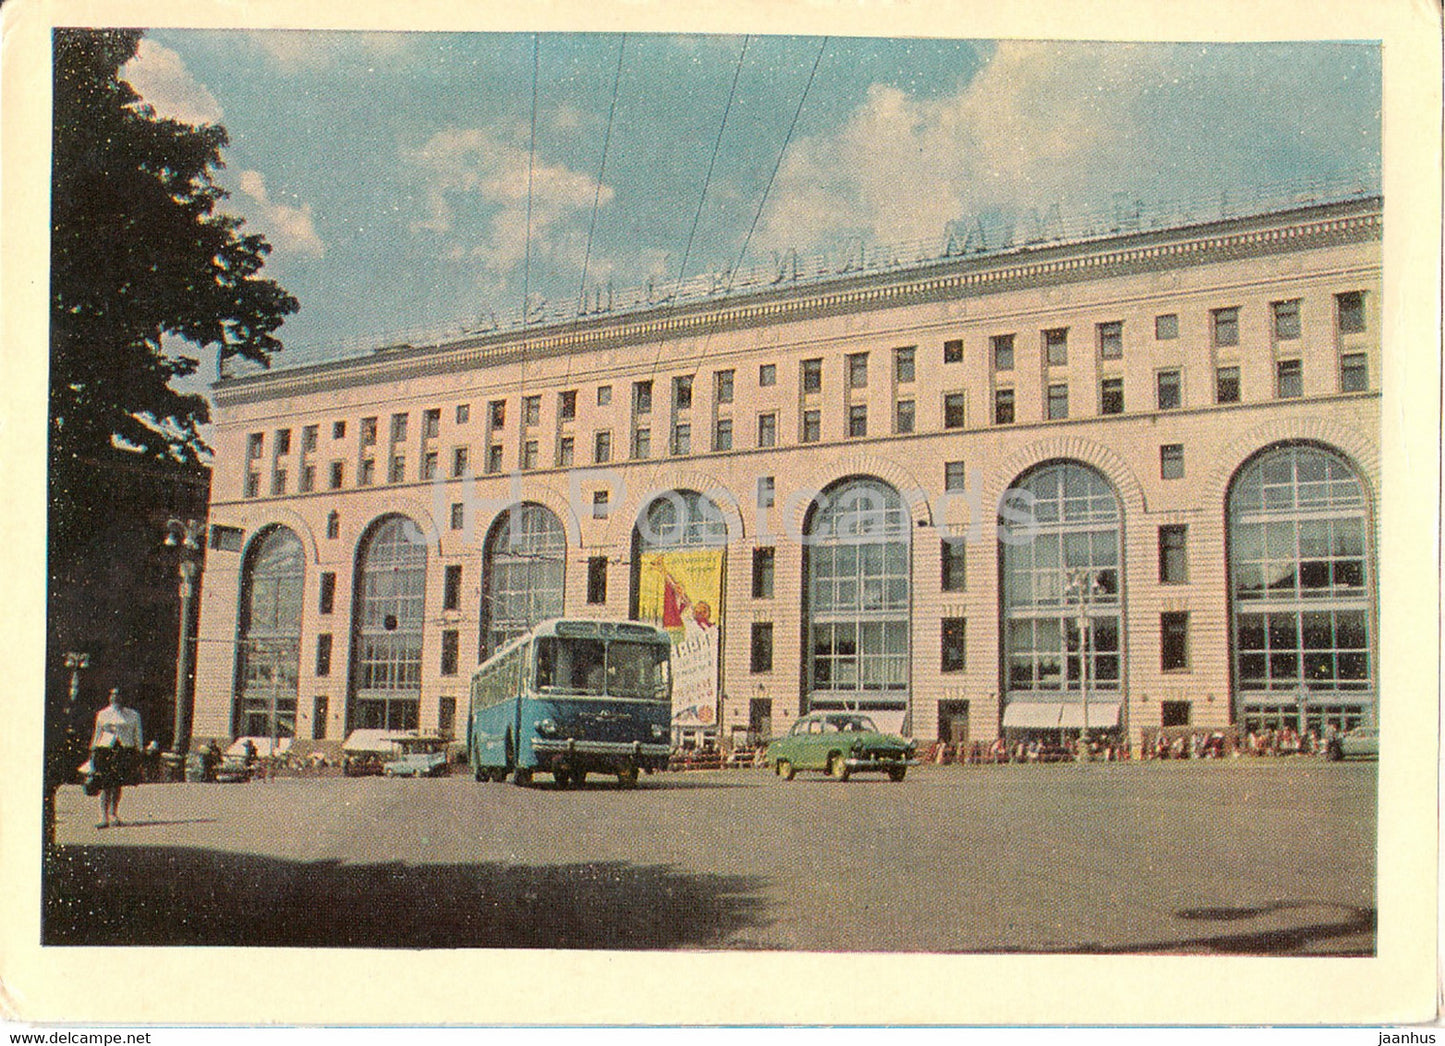 Moscow - Building of Detsky Mir - Children Universal Store - bus - 1967 - Russia USSR - used - JH Postcards